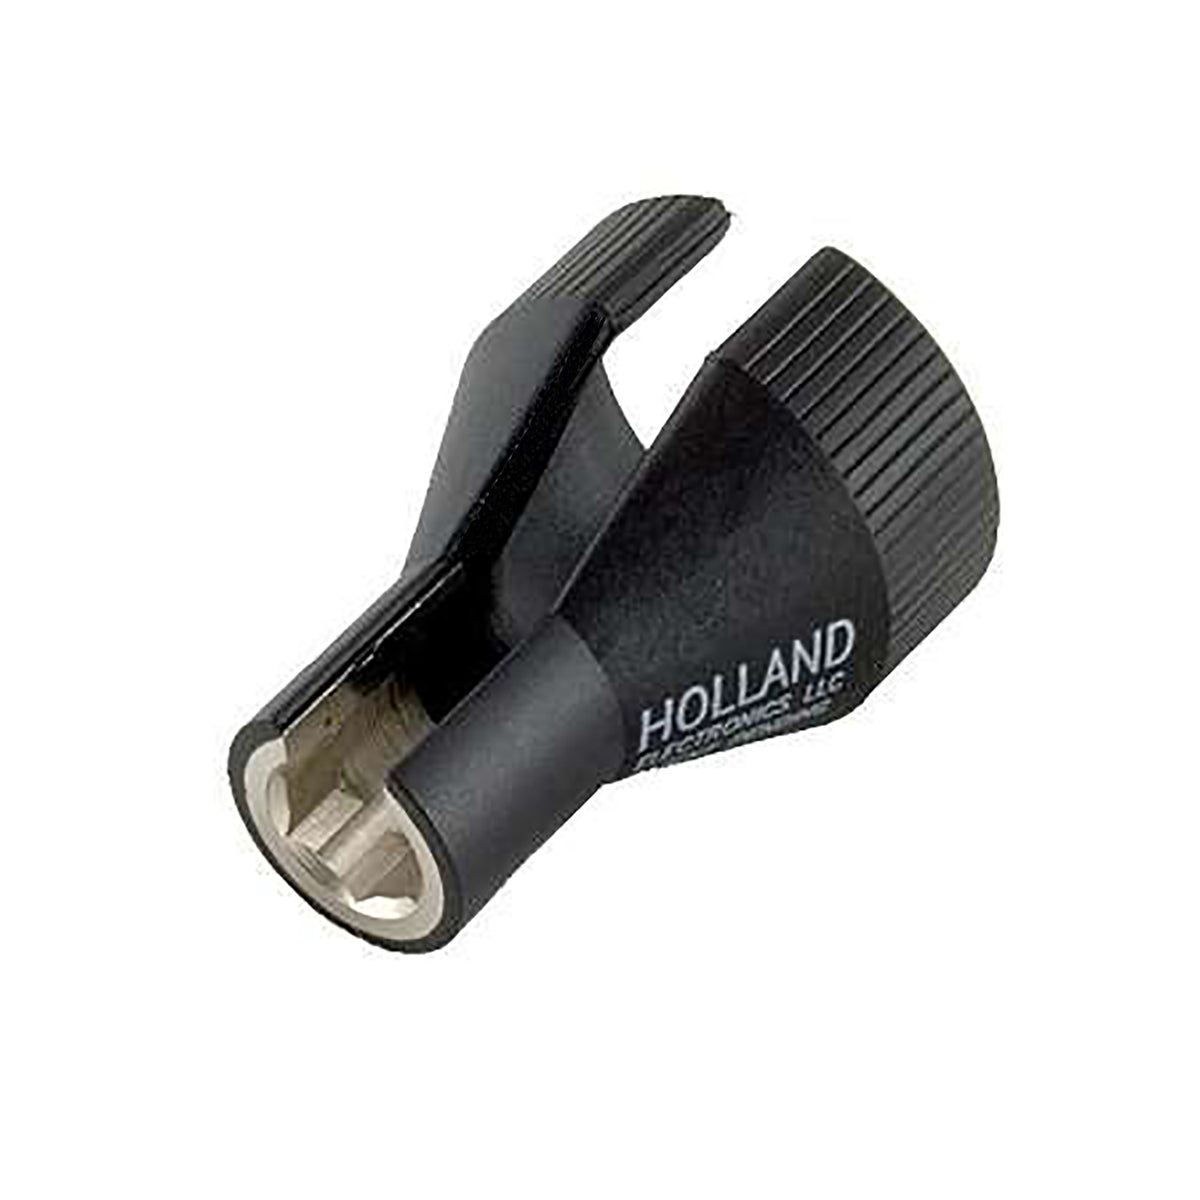 Holland SatelliteSale & Installation Removal F-Connector Tool CIT-1 —